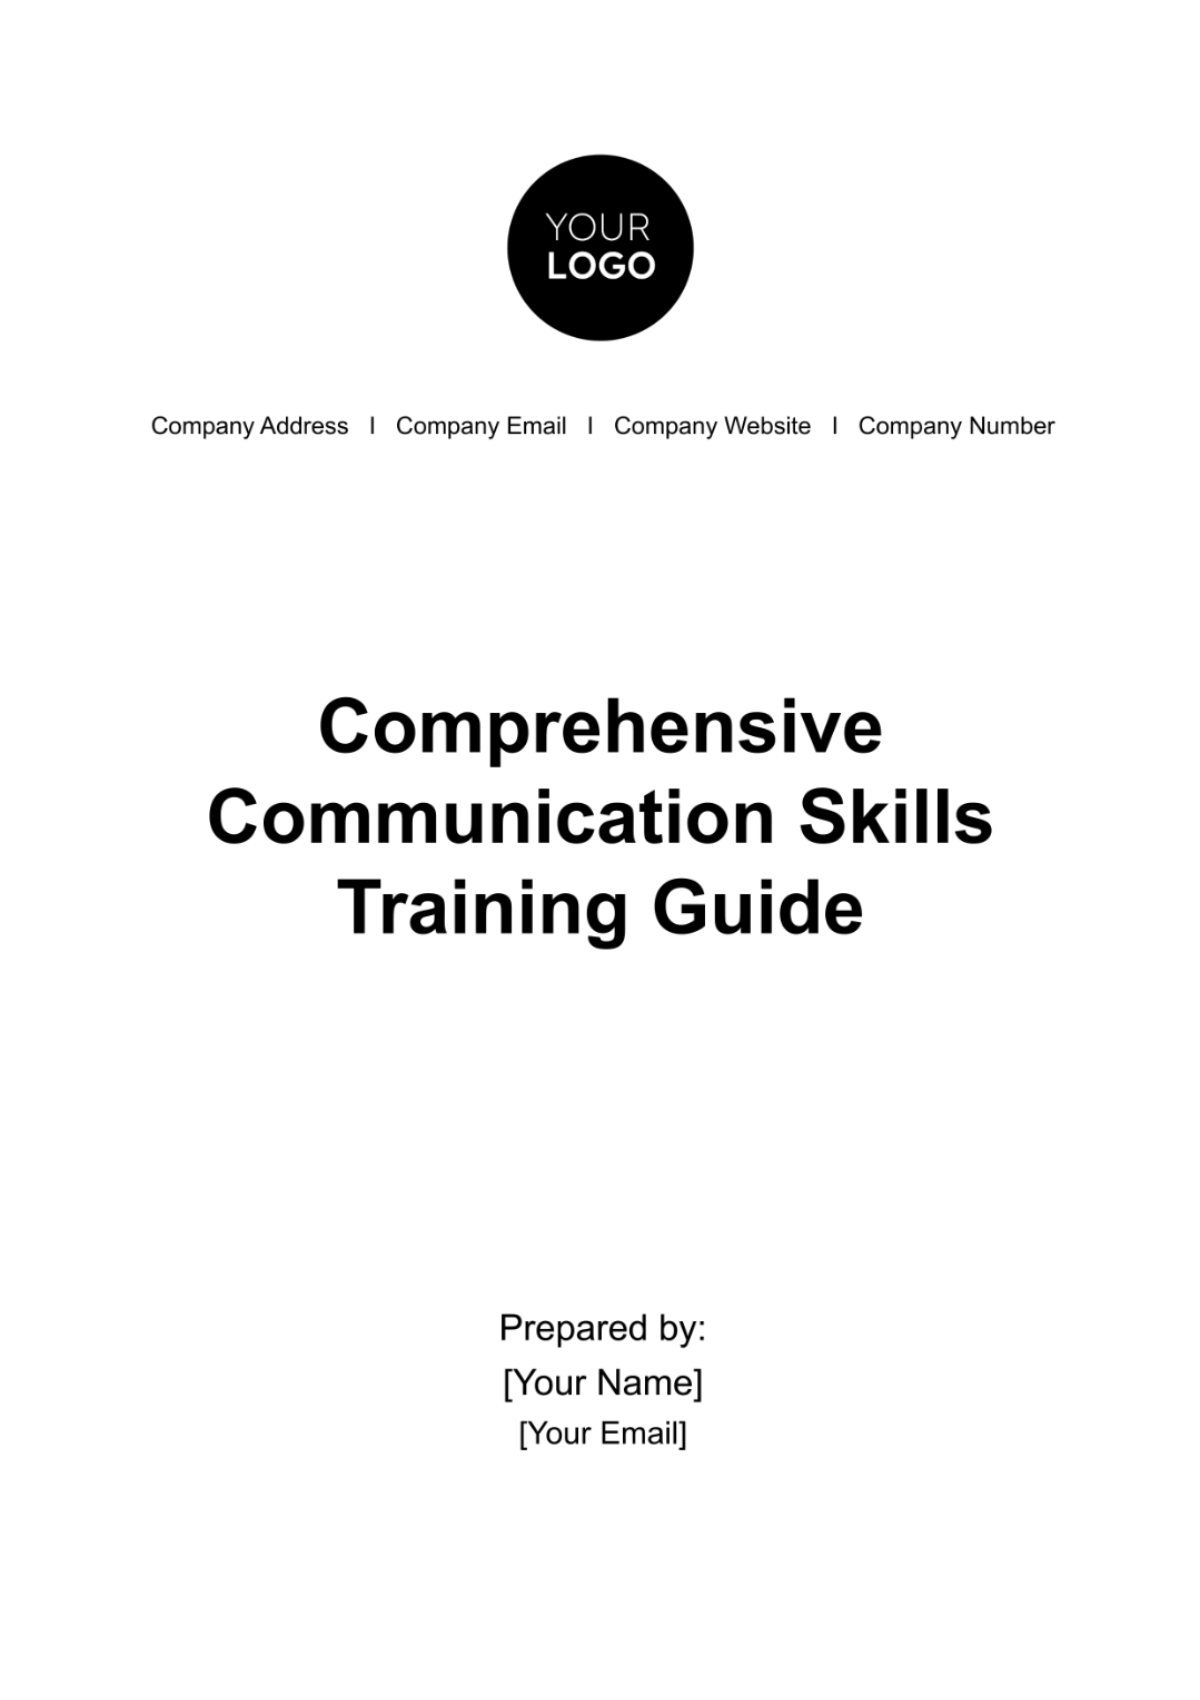 Free Comprehensive Communication Skills Training Guide HR Template